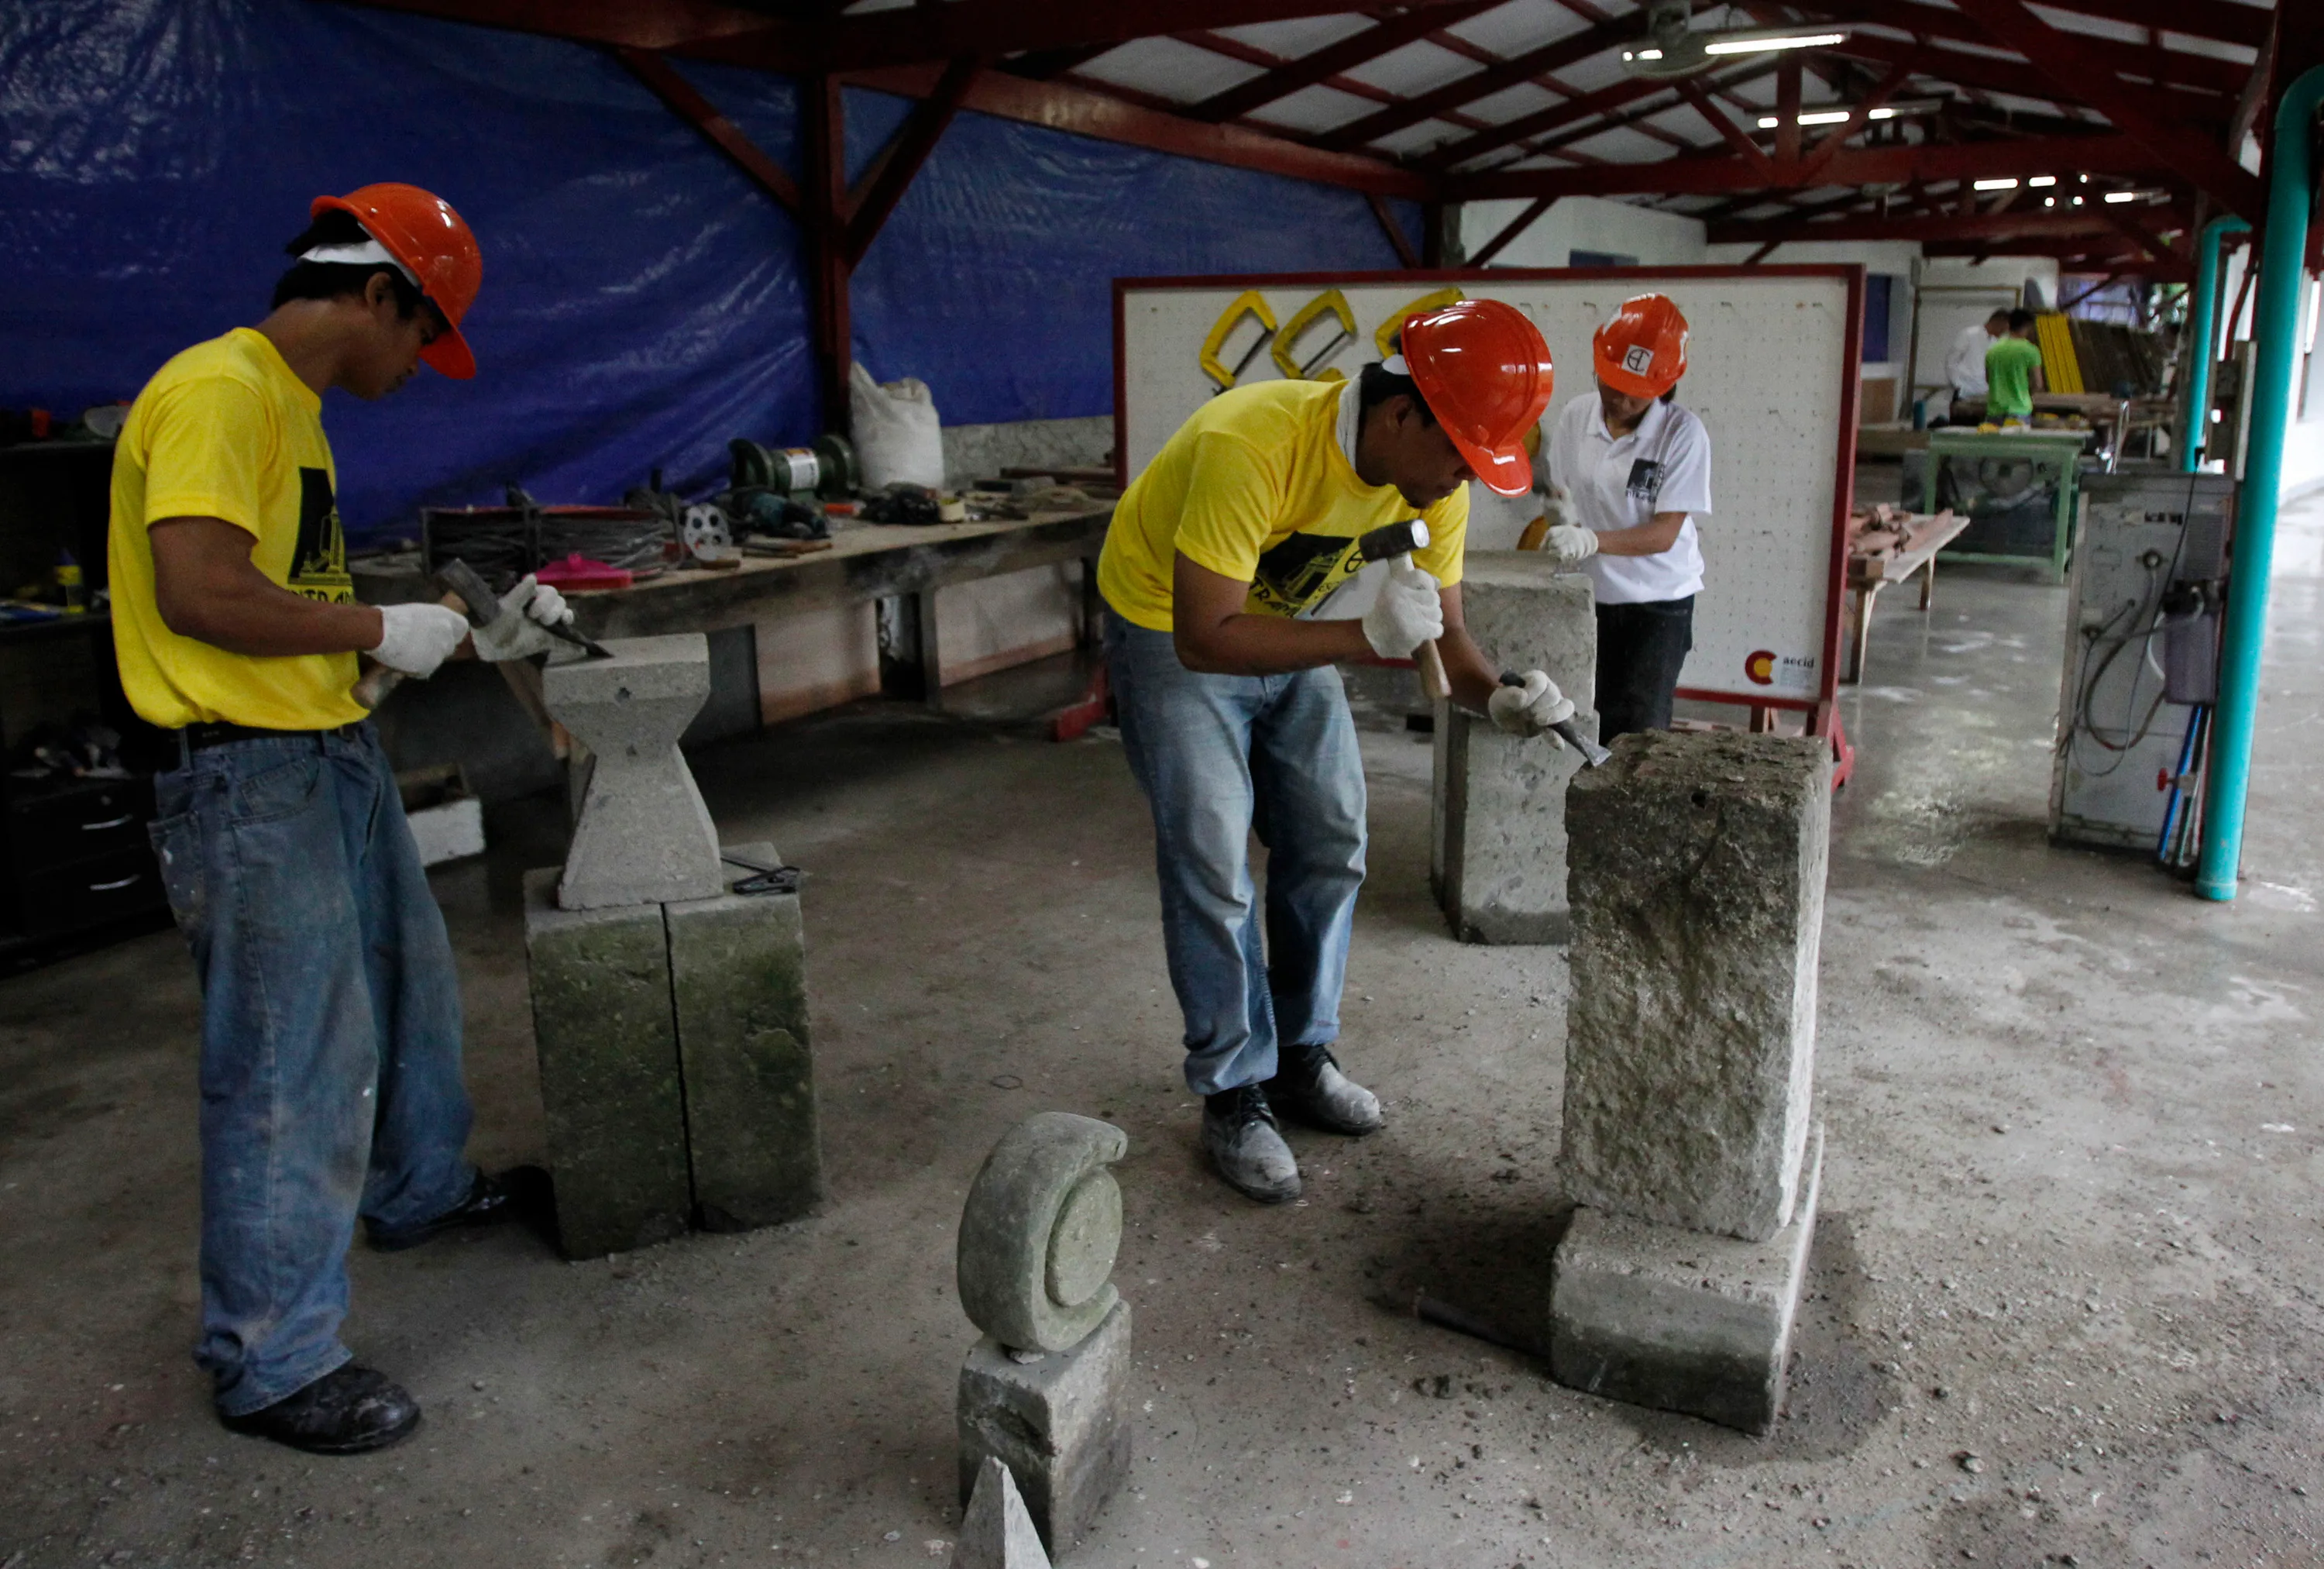 Students of the Escuela Taller technical school, which is funded by the Spanish government, carve adobe stones while waiting for the arrival of Spain's Queen Sofia (not pictured) in Intramuros, Manila July 3, 2012. Queen Sofia is on a five-day visit to the Philippines to inspect development projects which receive funding assistance from the Spanish government. REUTERS/Erik De Castro (PHILIPPINES - Tags: SOCIETY EDUCATION) - GM1E87312SK01